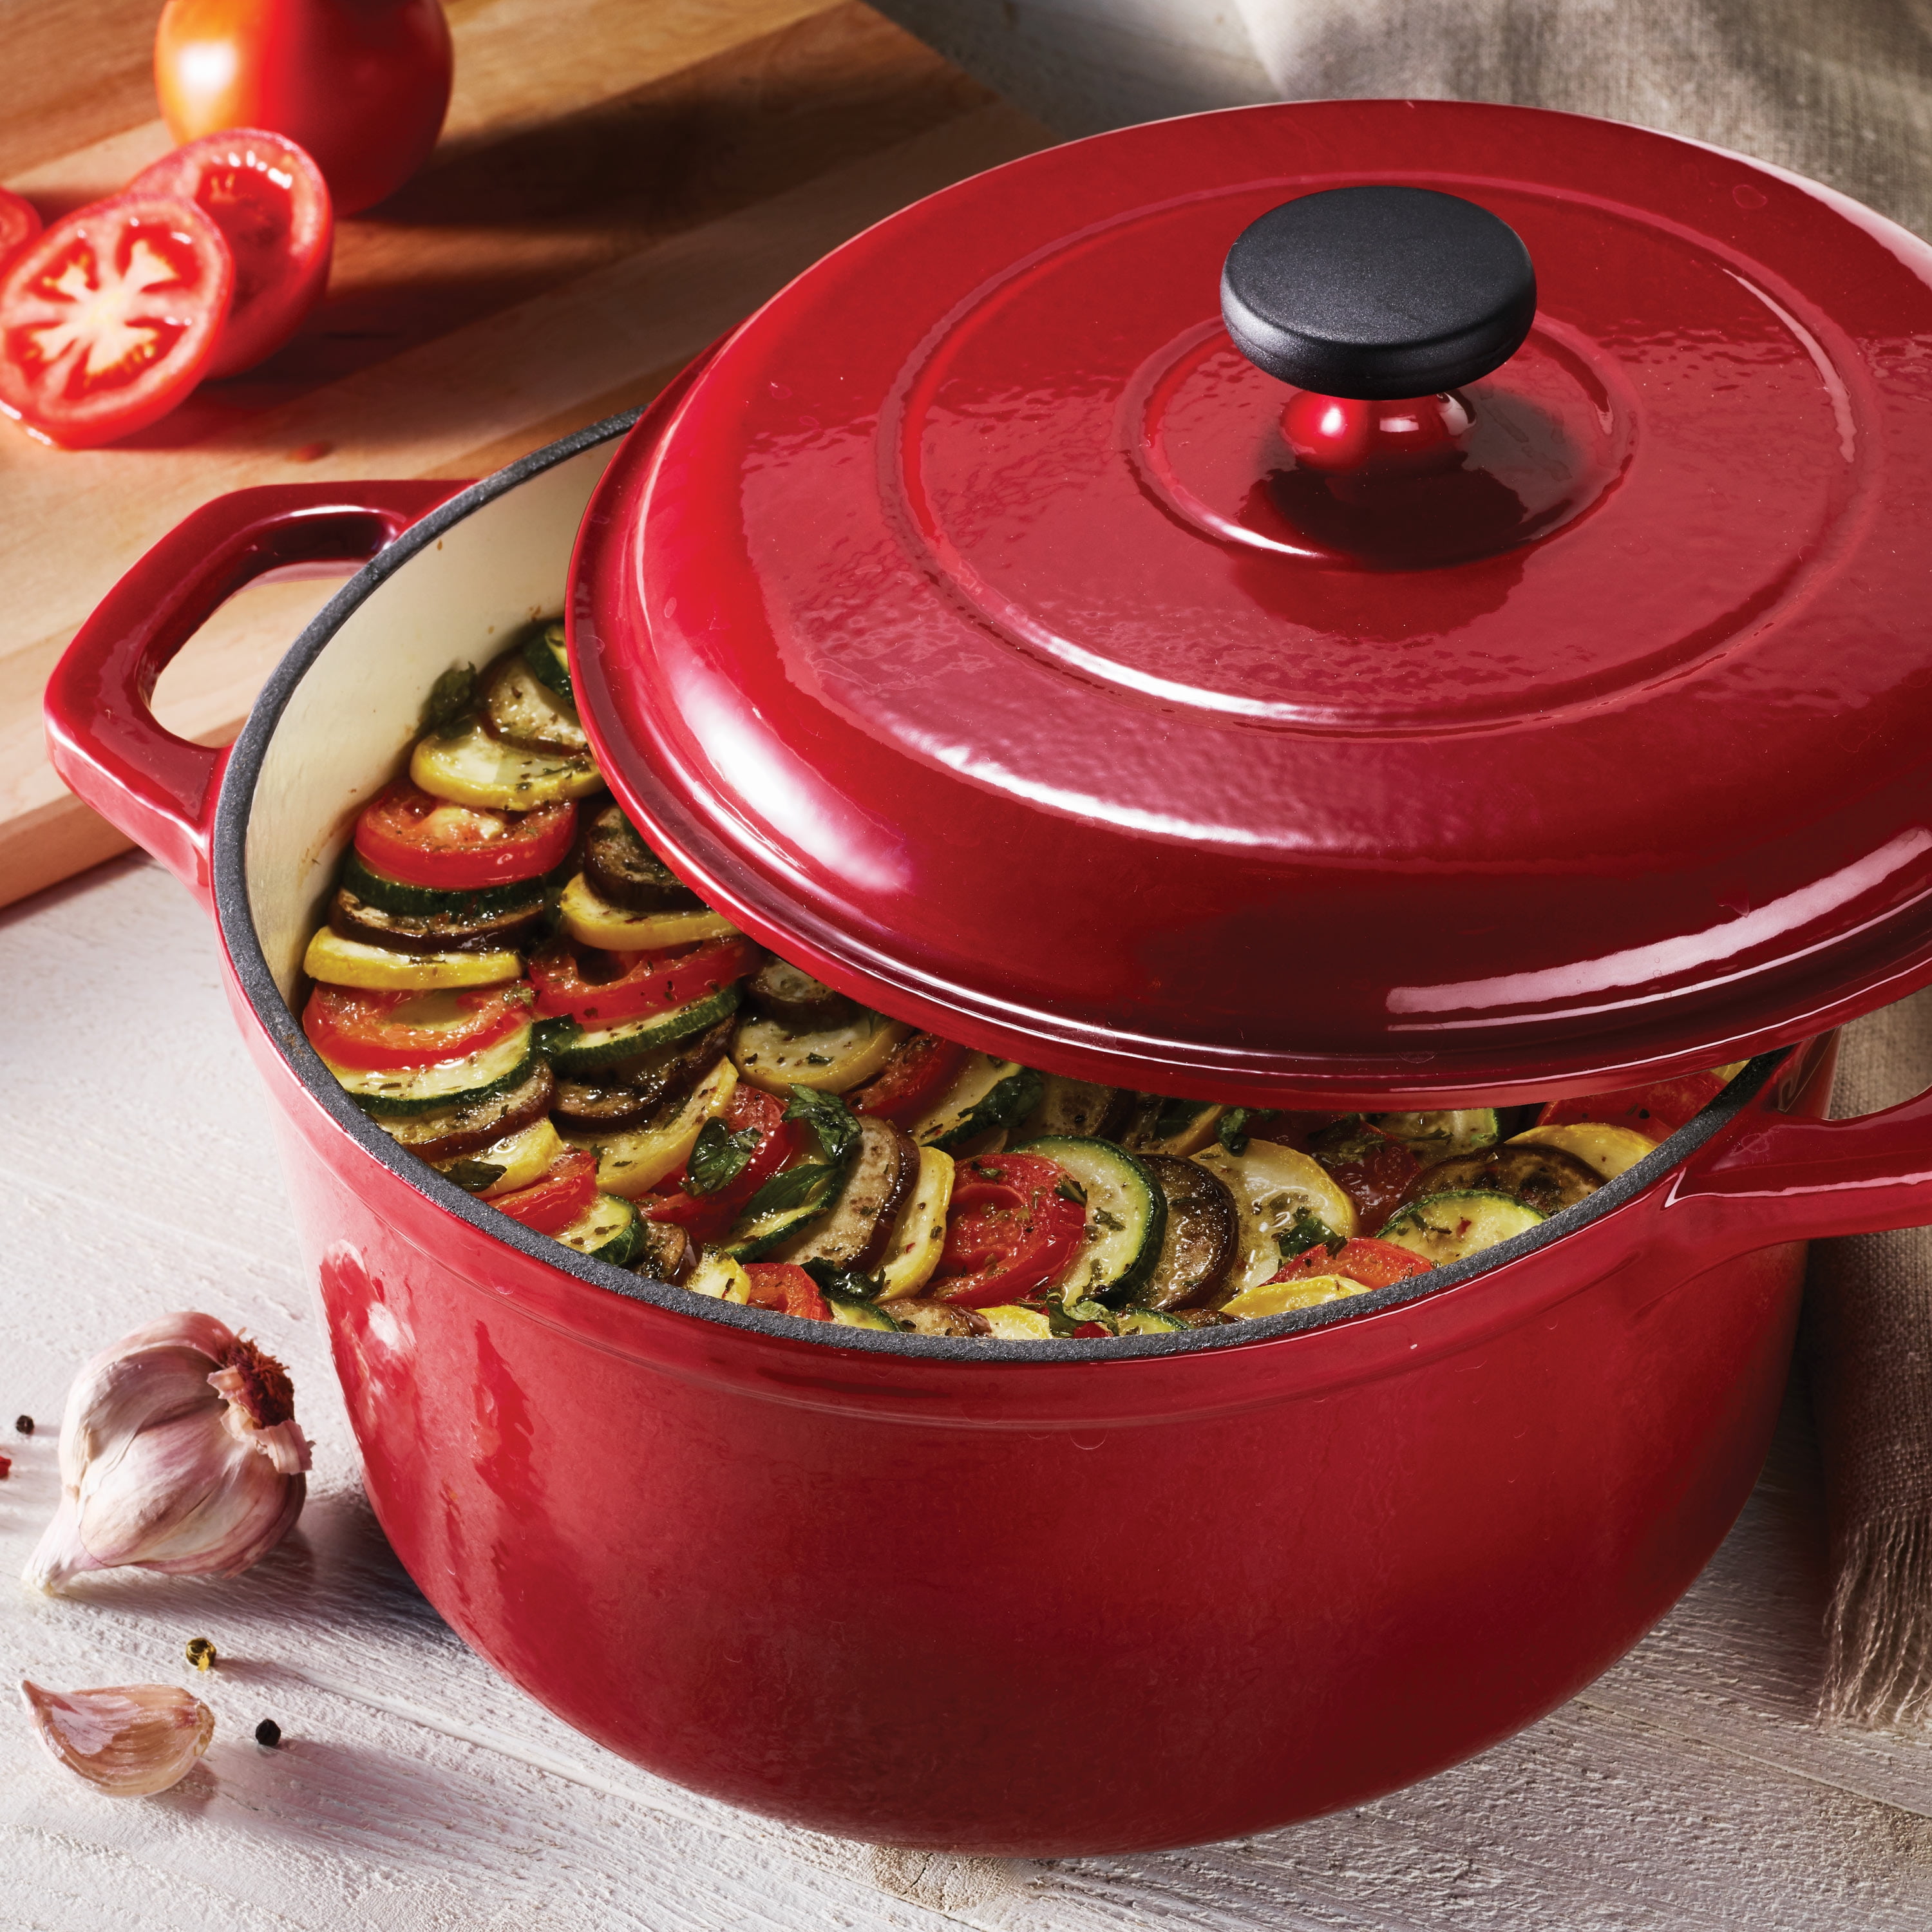 Tramontina 80131/037DS Enameled Cast Iron Covered Round Dutch Oven 5.5-Quart Majolica Red